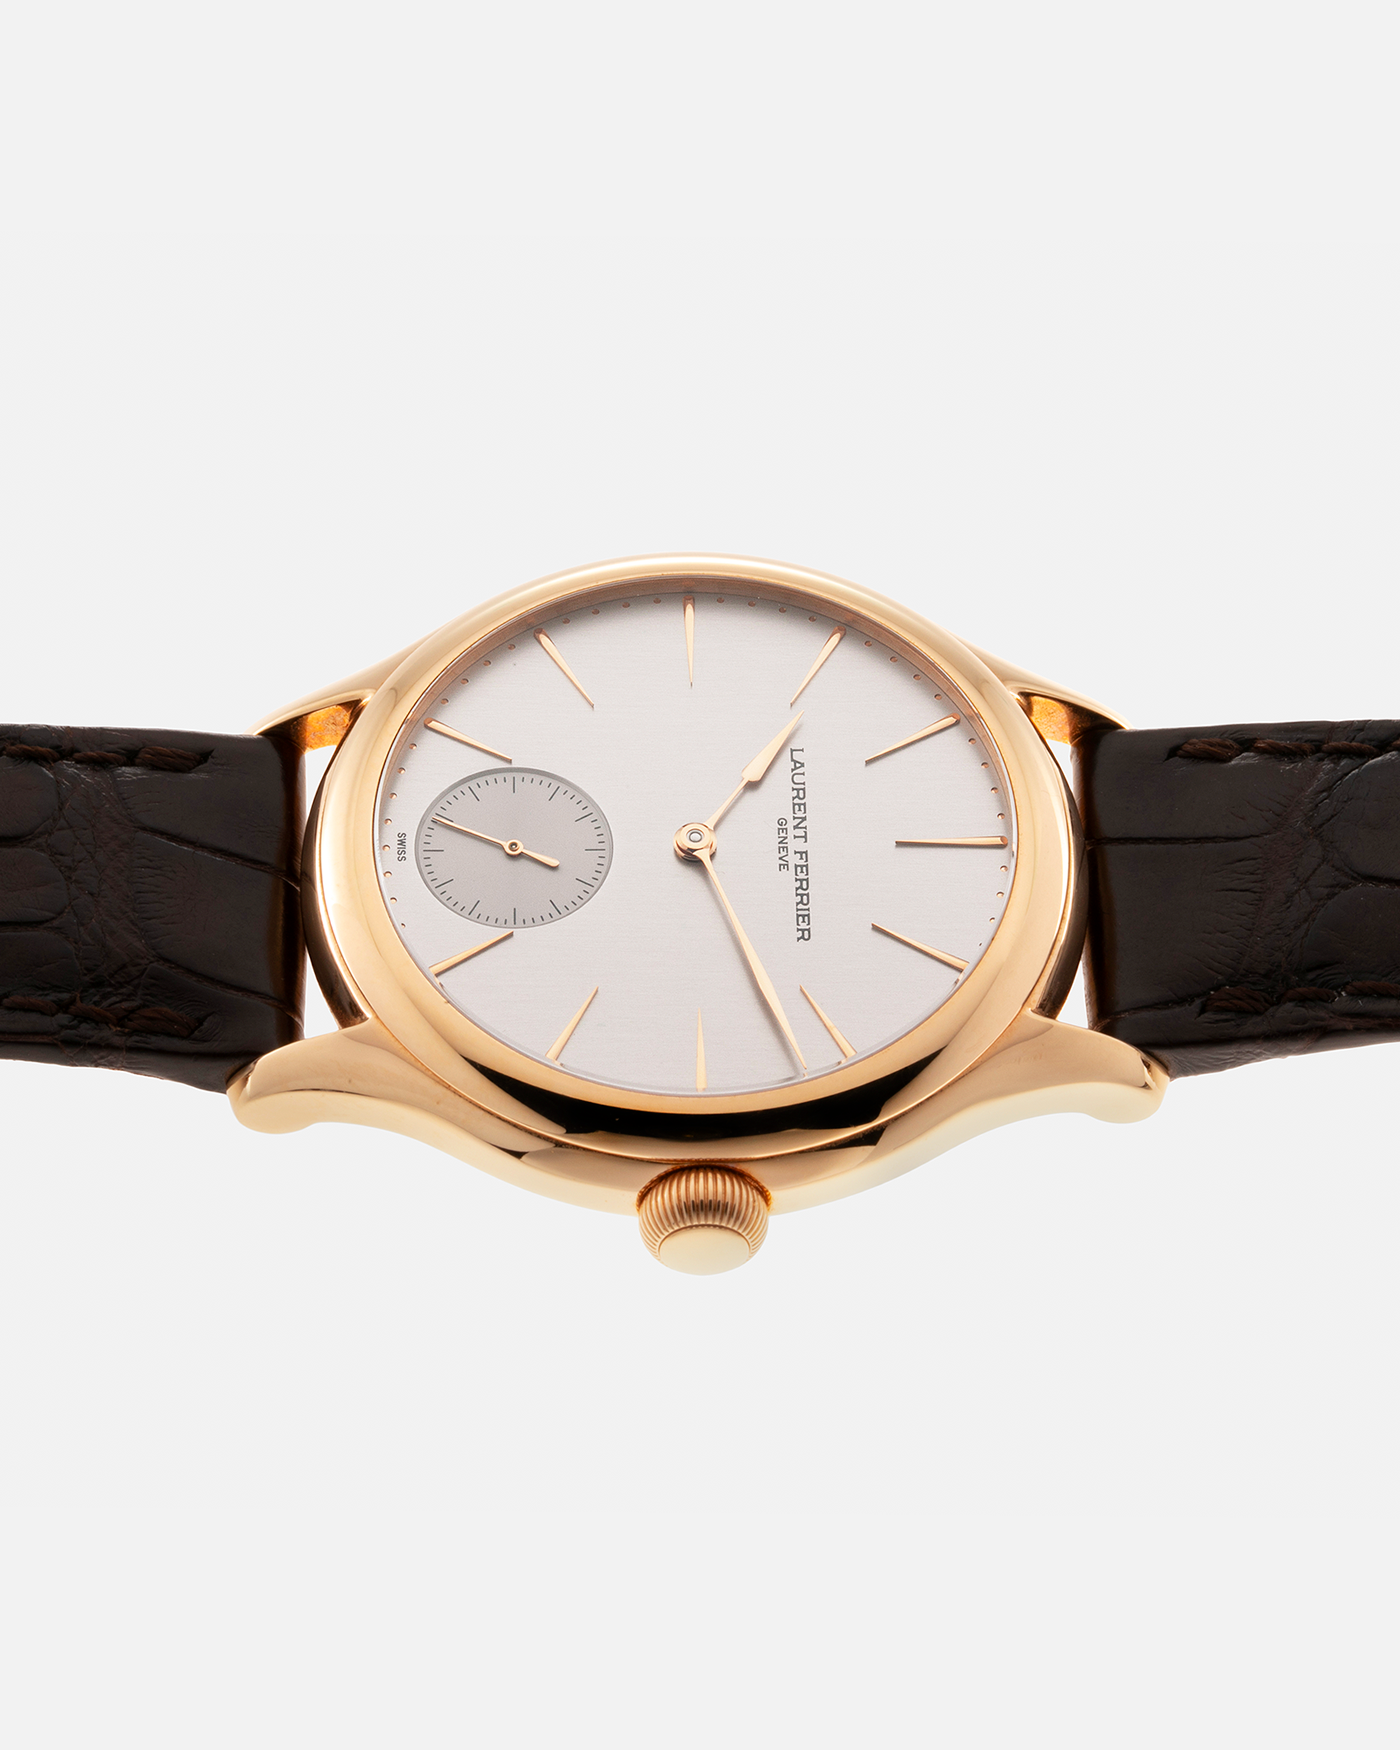 Brand: Laurent Ferrier Year: 2015 Model: Galet Classic Micro-Rotor Material: 18-carat Yellow Gold Movement: Cal. 229.01 Micro-Rotor, Self-Winding Case Diameter: 40mm Strap: Laurent Ferrier Brown Alligator Leather Strap with Signed 18-carat Rose Gold Tang Buckle